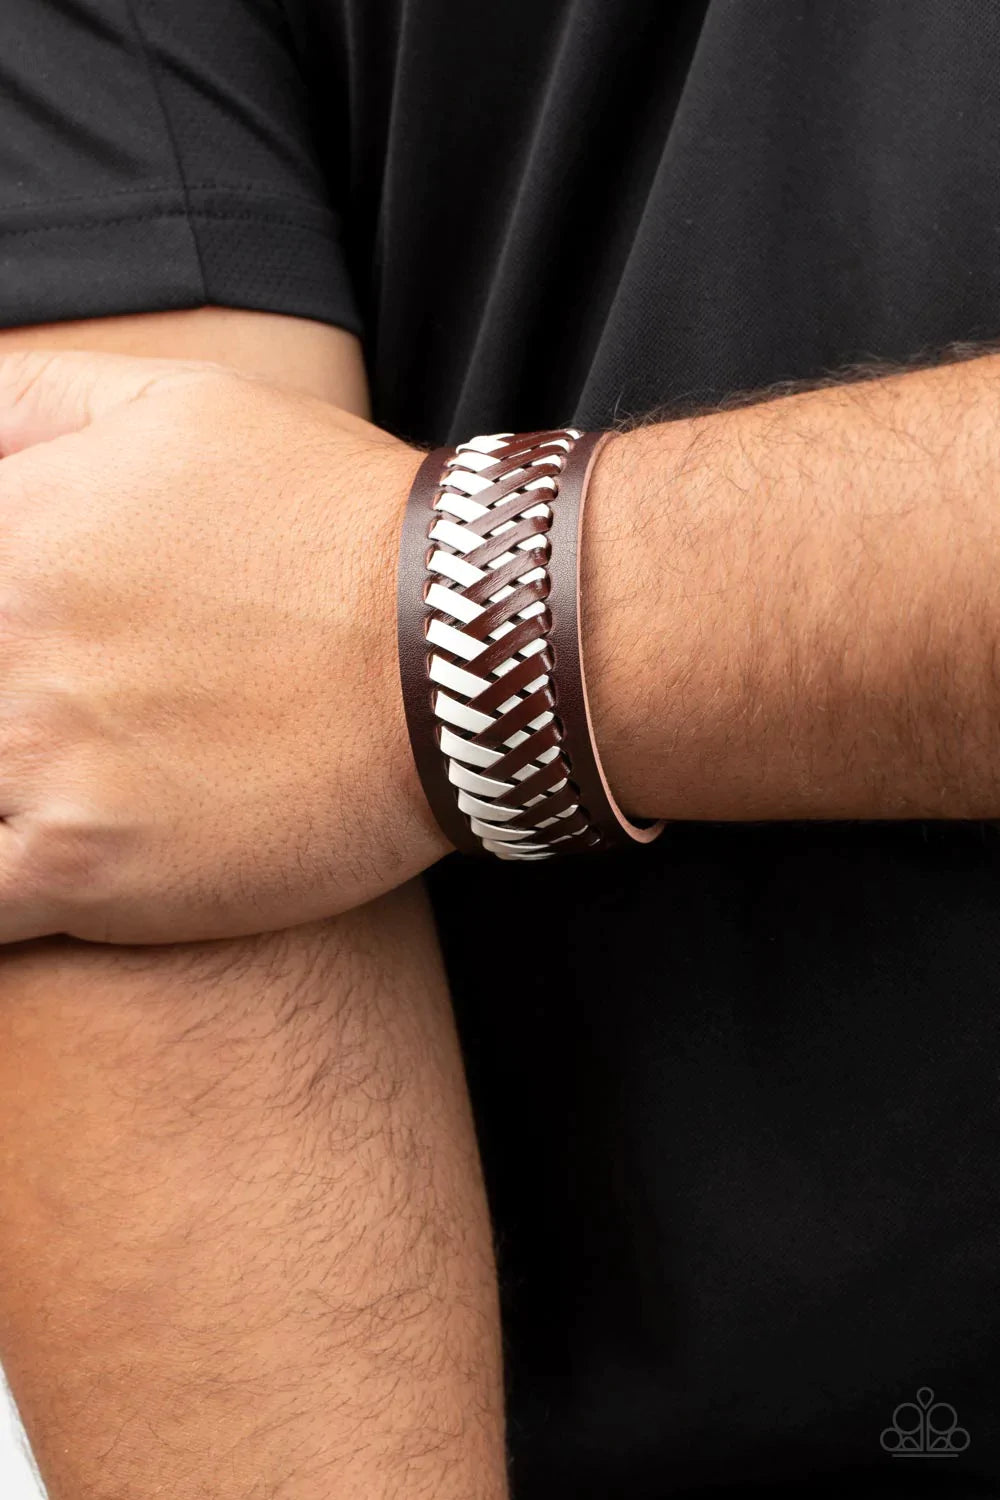 Paparazzi Accessories Punk Rocker Road - Brown Brown and white leather laces decoratively crisscross across the front of a thick brown leather band, resulting in a rebellious pop of color around the wrist. Features an adjustable snap closure. Sold as one